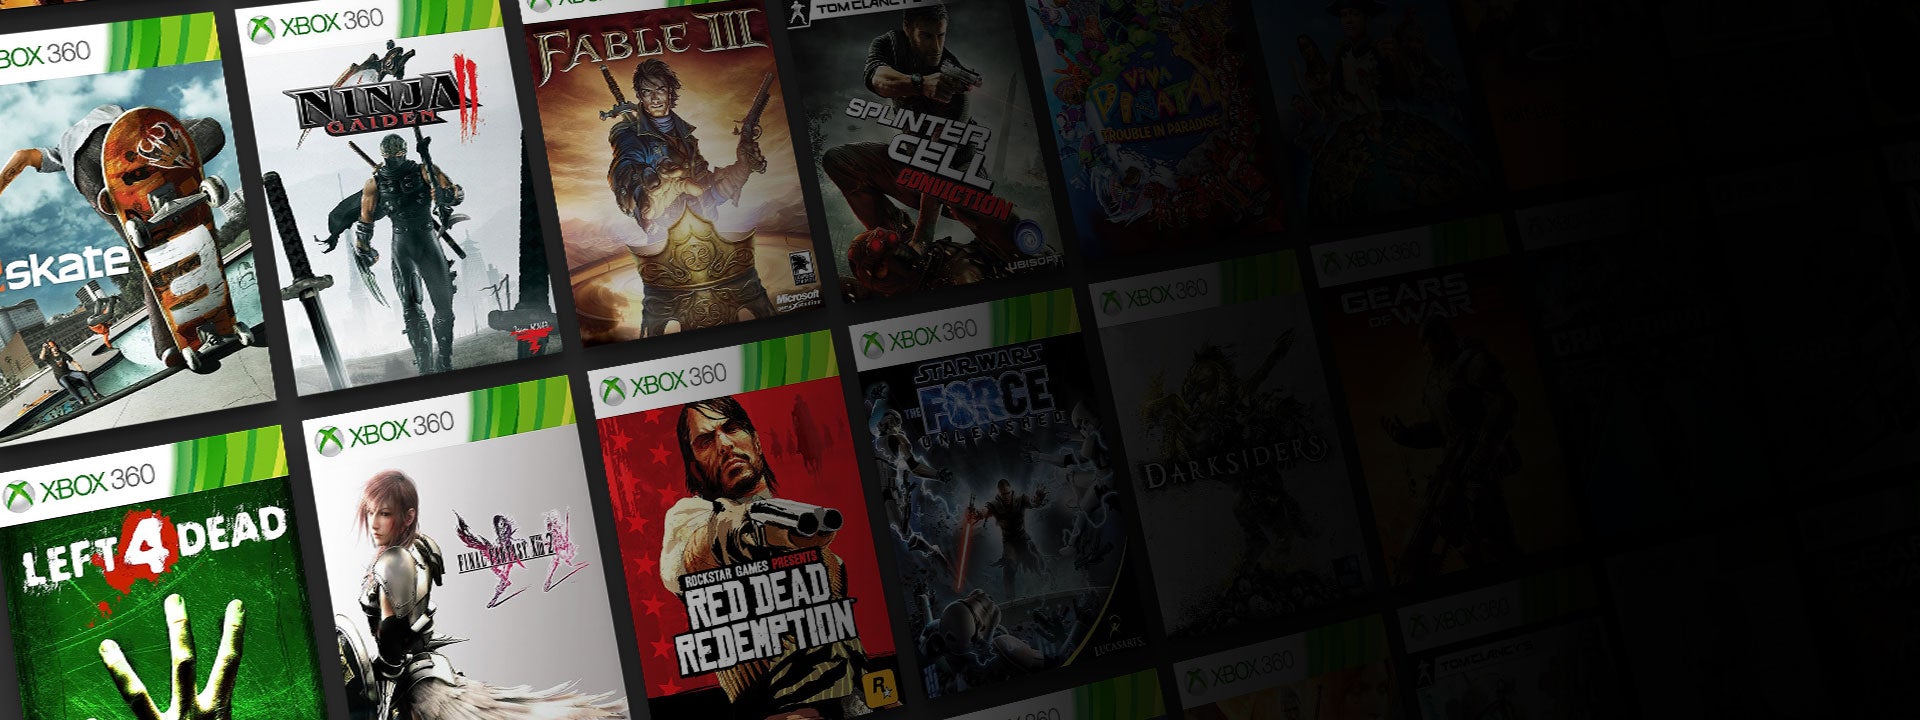 Xbox backwards compatibility list, with all Xbox 360 games and 